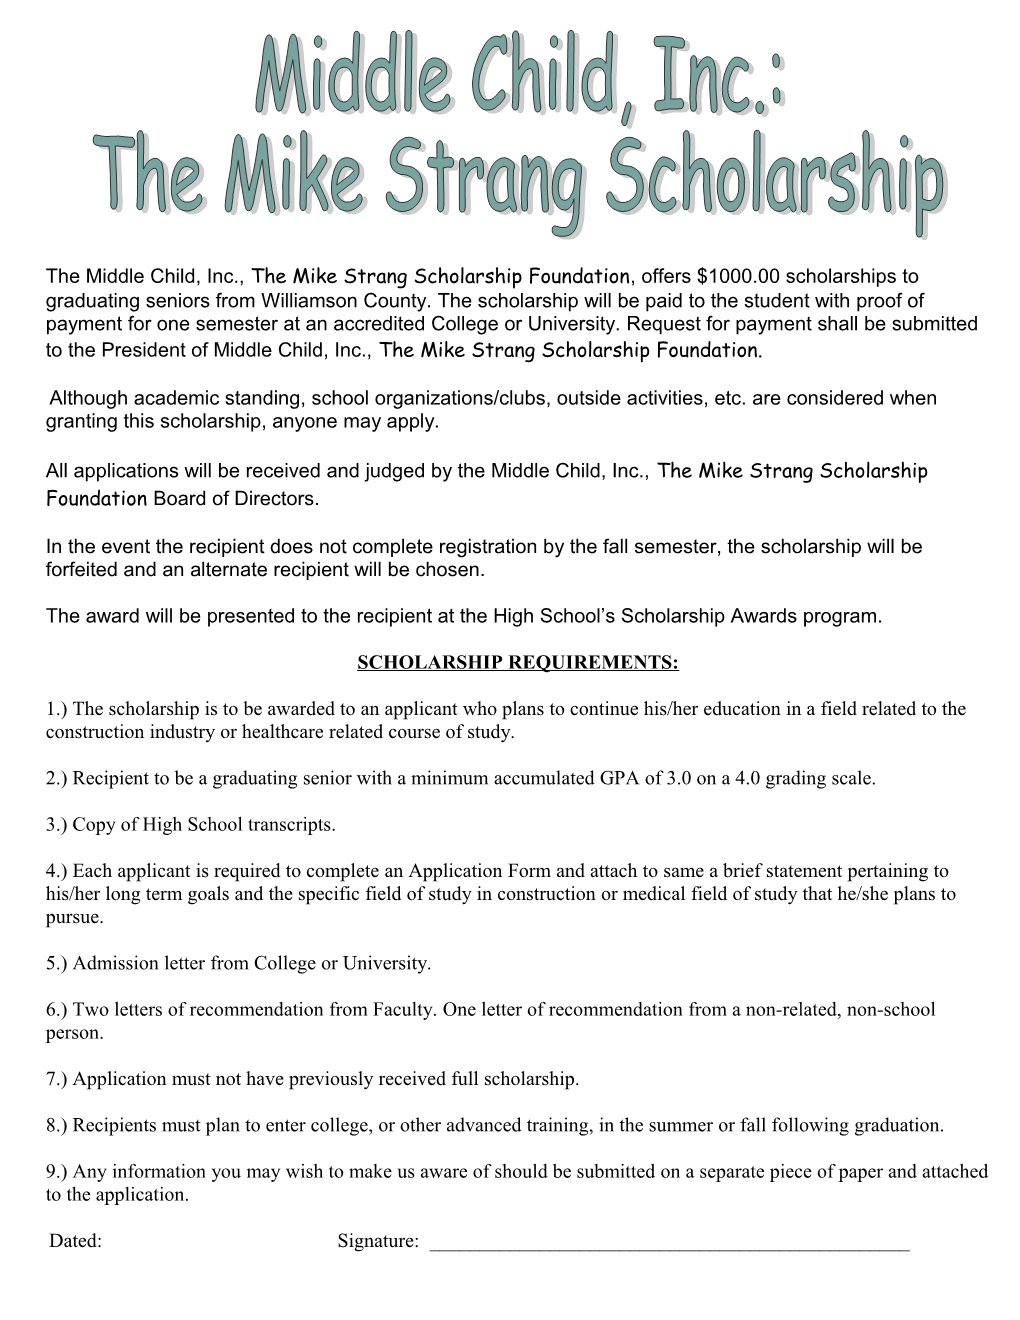 The Middle Child, Inc., the Mike Strang Scholarship Foundation, Offers $1000.00 Scholarships